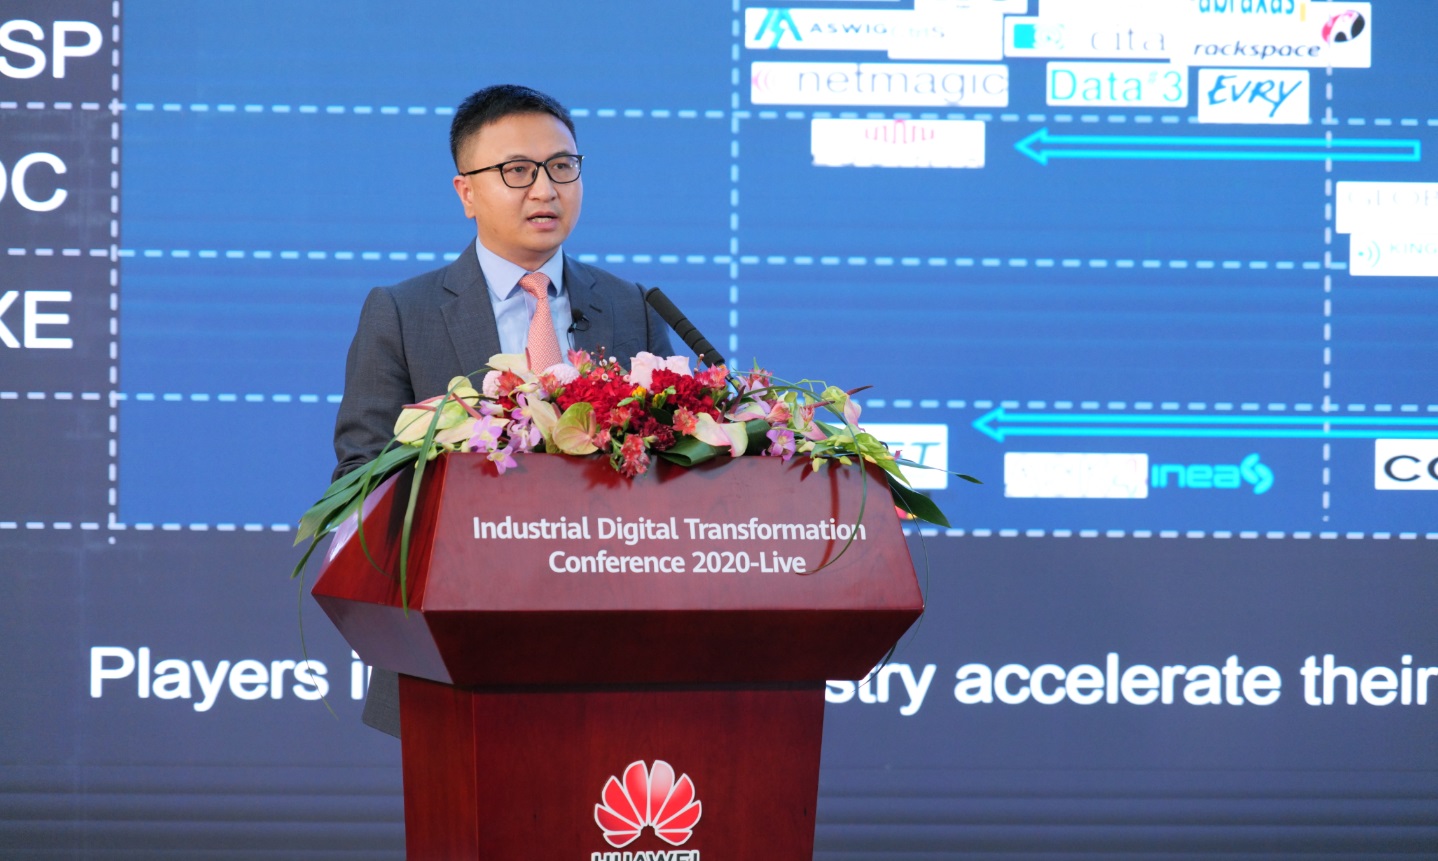 Deng Jiang, Director of the Huawei Internet Service Industry, presenting at the Industrial Digital Transformation Conference